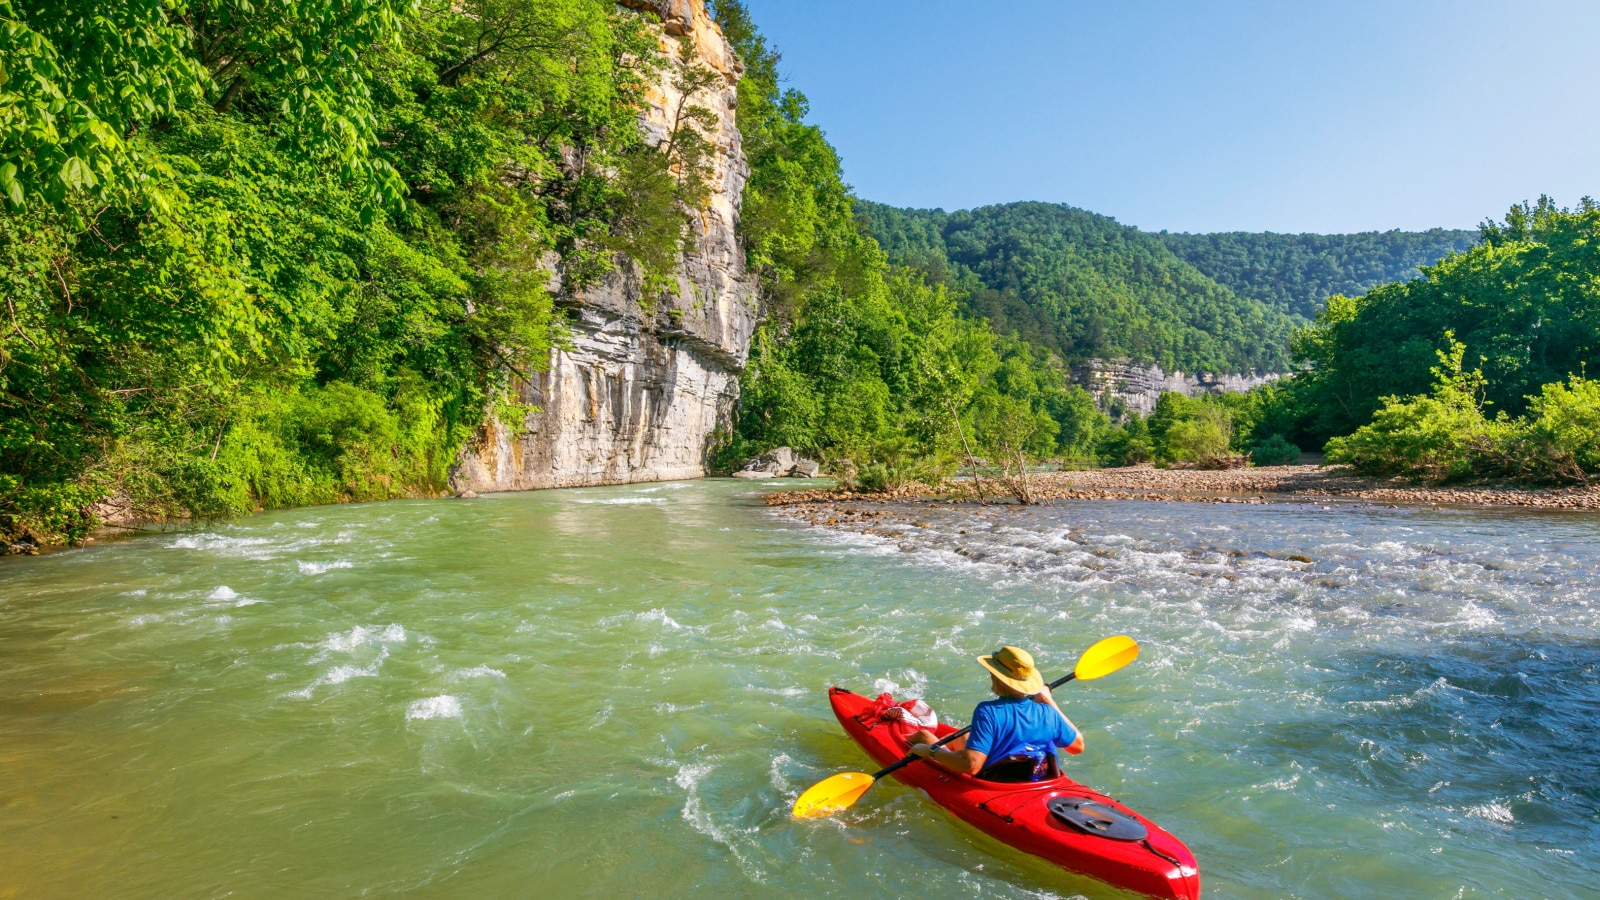 A kayaker is floating down the Buffalo River near Ponca, Arkansas.